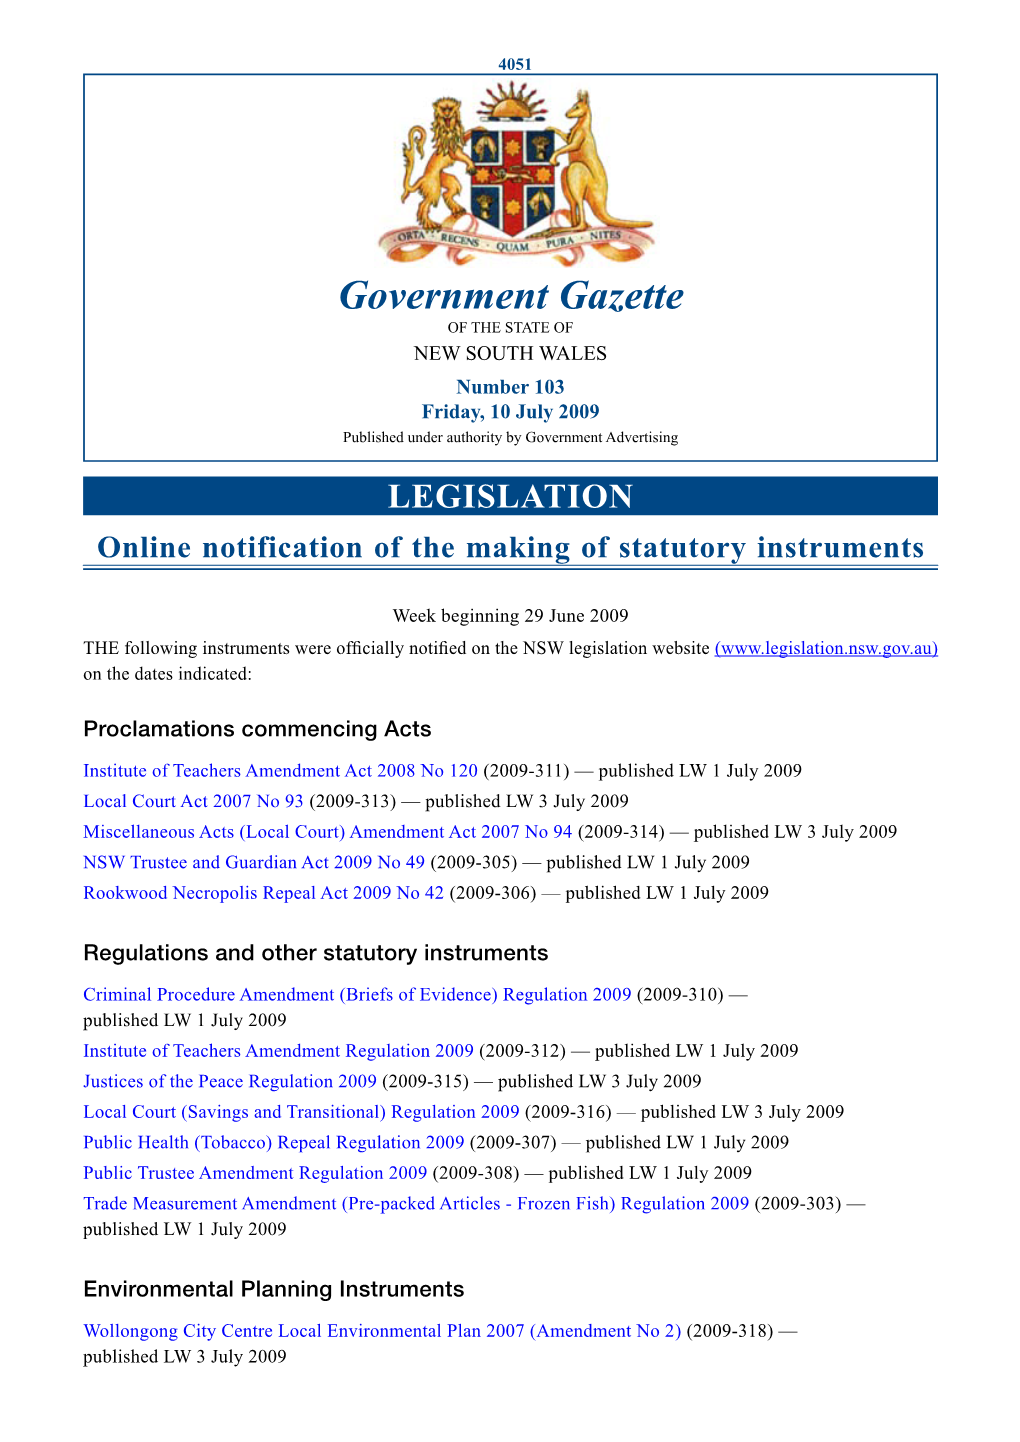 Government Gazette of the STATE of NEW SOUTH WALES Number 103 Friday, 10 July 2009 Published Under Authority by Government Advertising